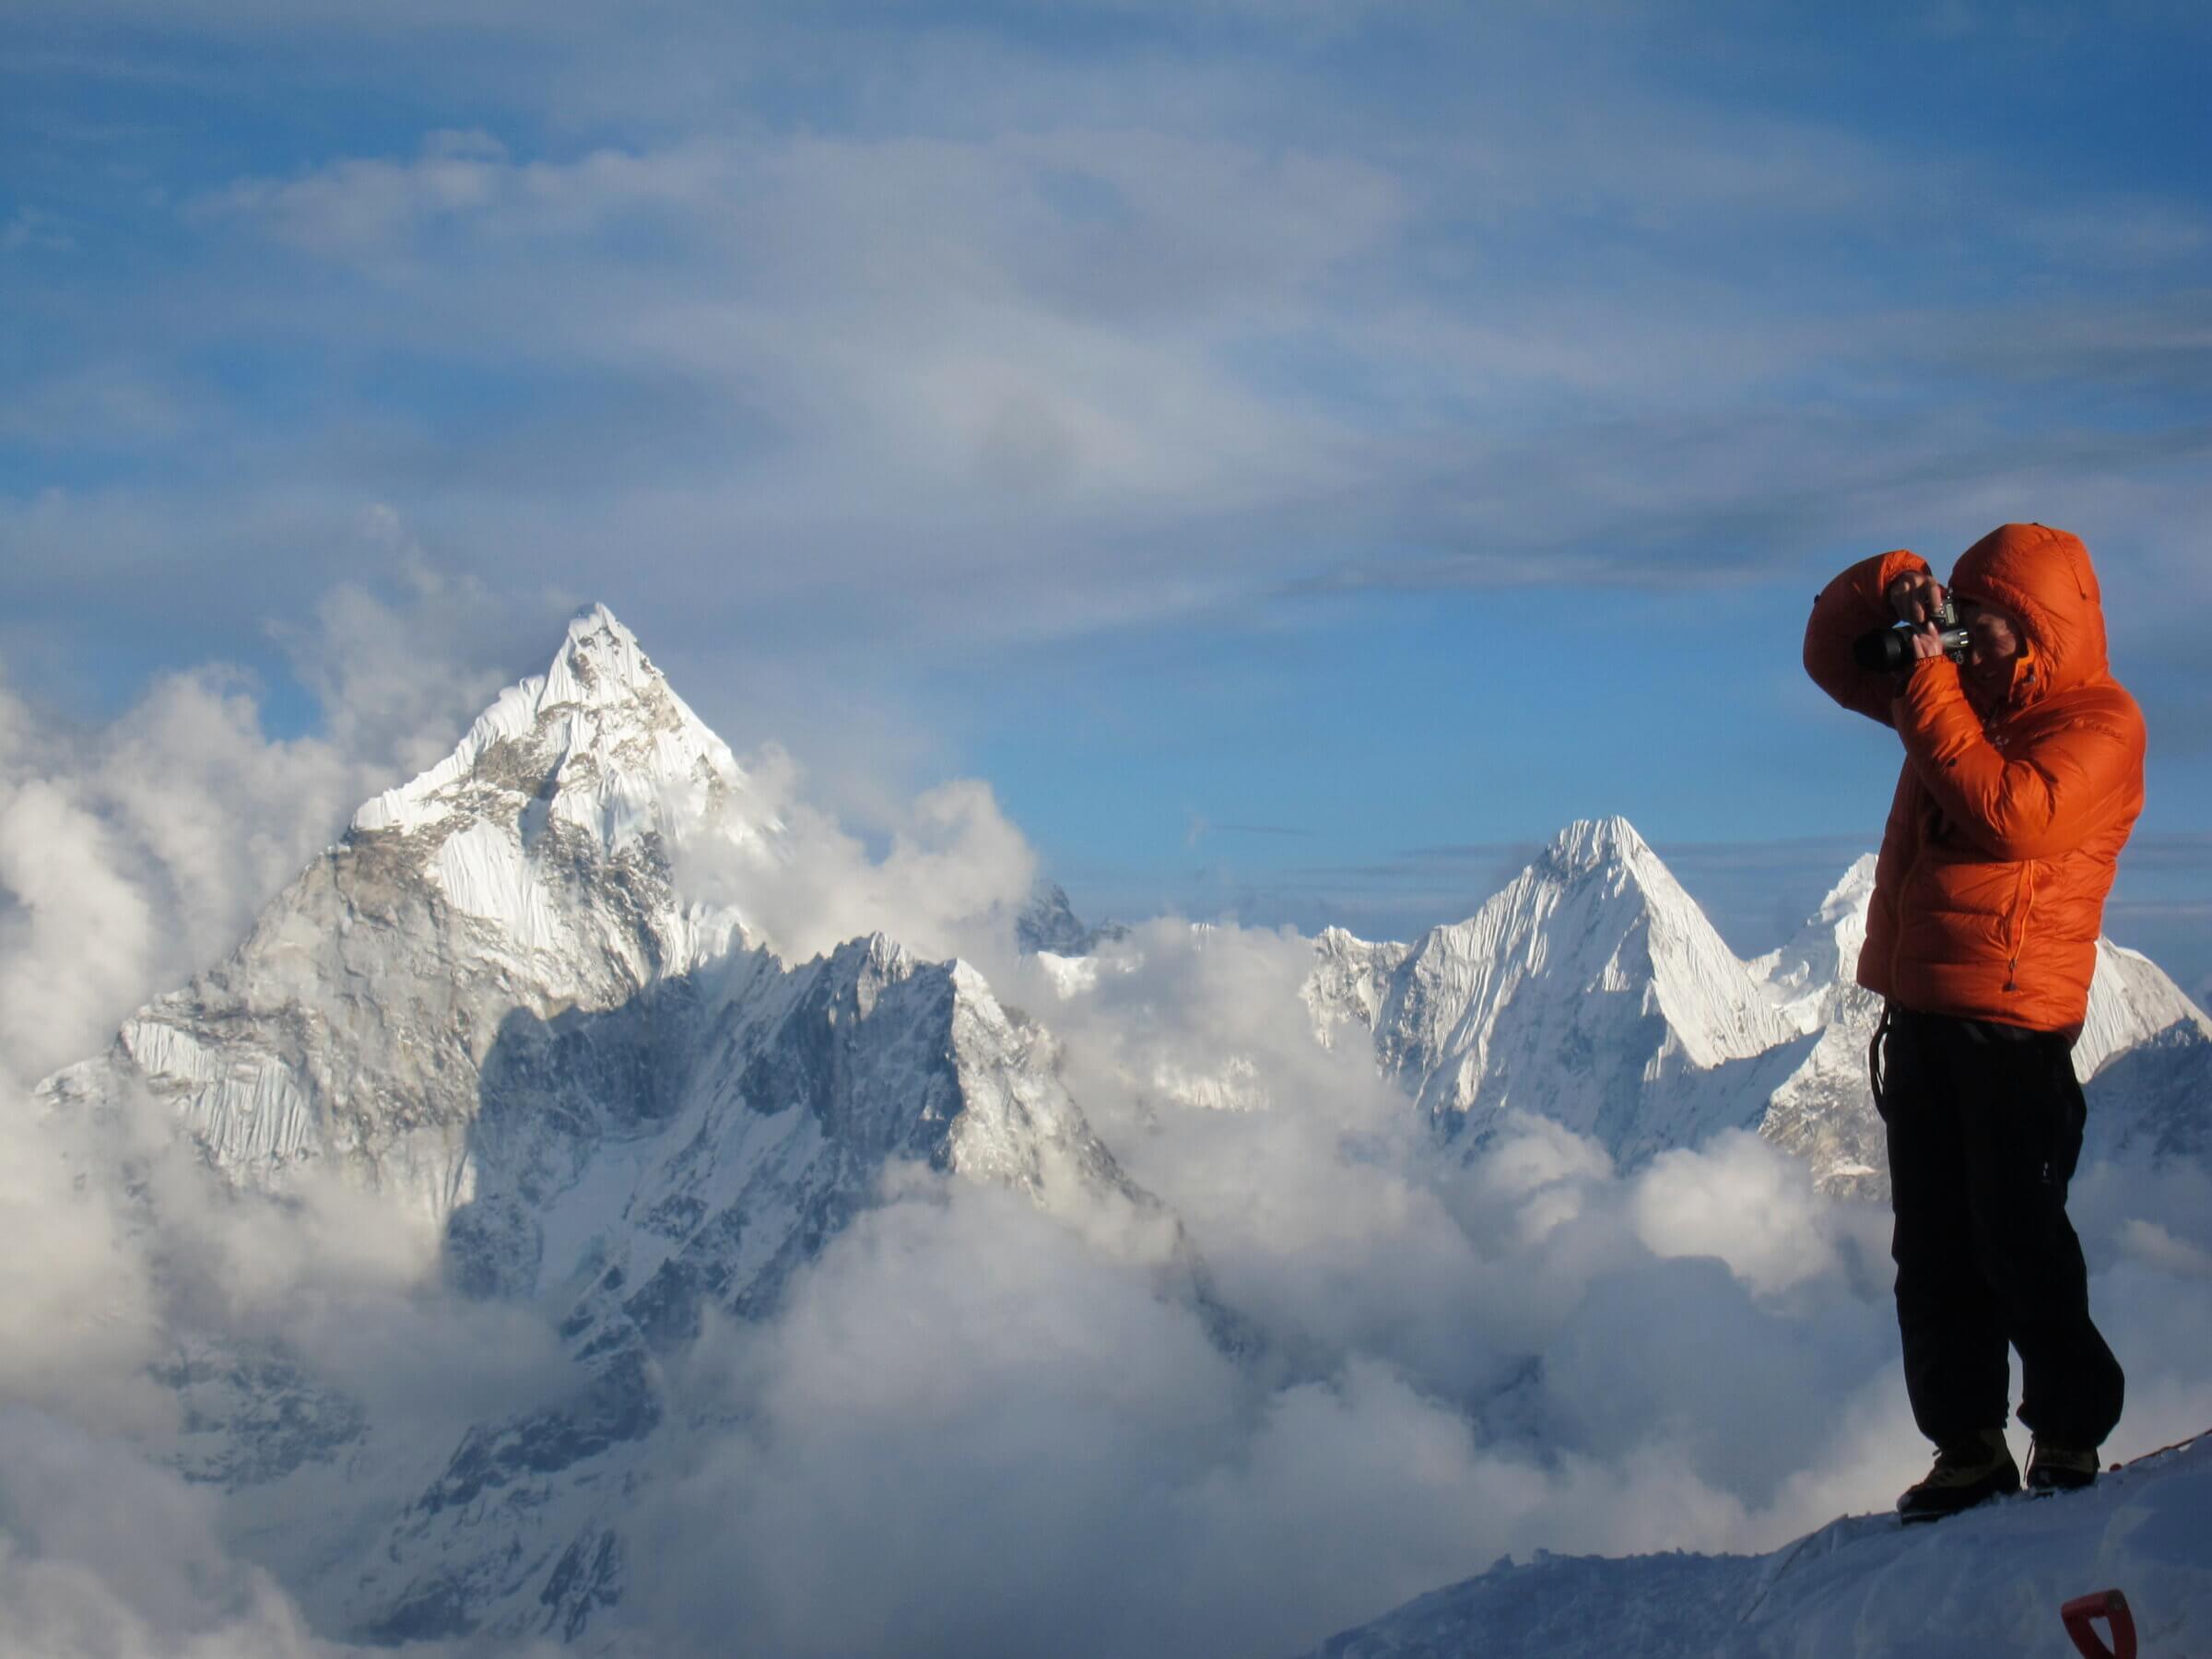 A photographer stands on a ridge with a large Himalayan mountain behind him.